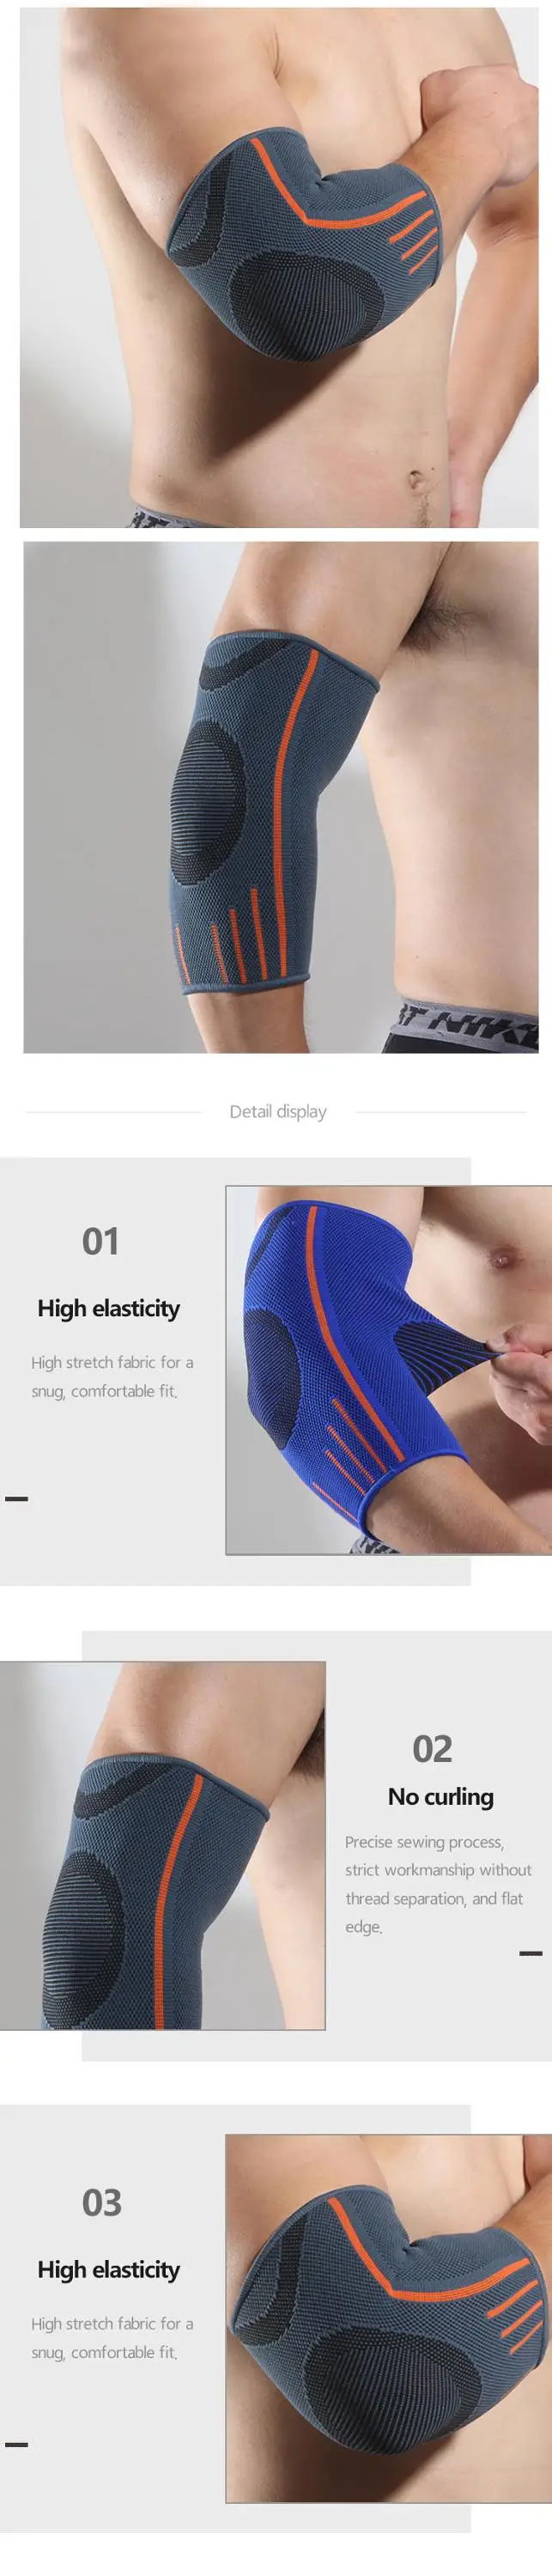 Enerup Cycling Baseball Tennis Elbow Brace Support Compression Arm Cover Sleeve for sport